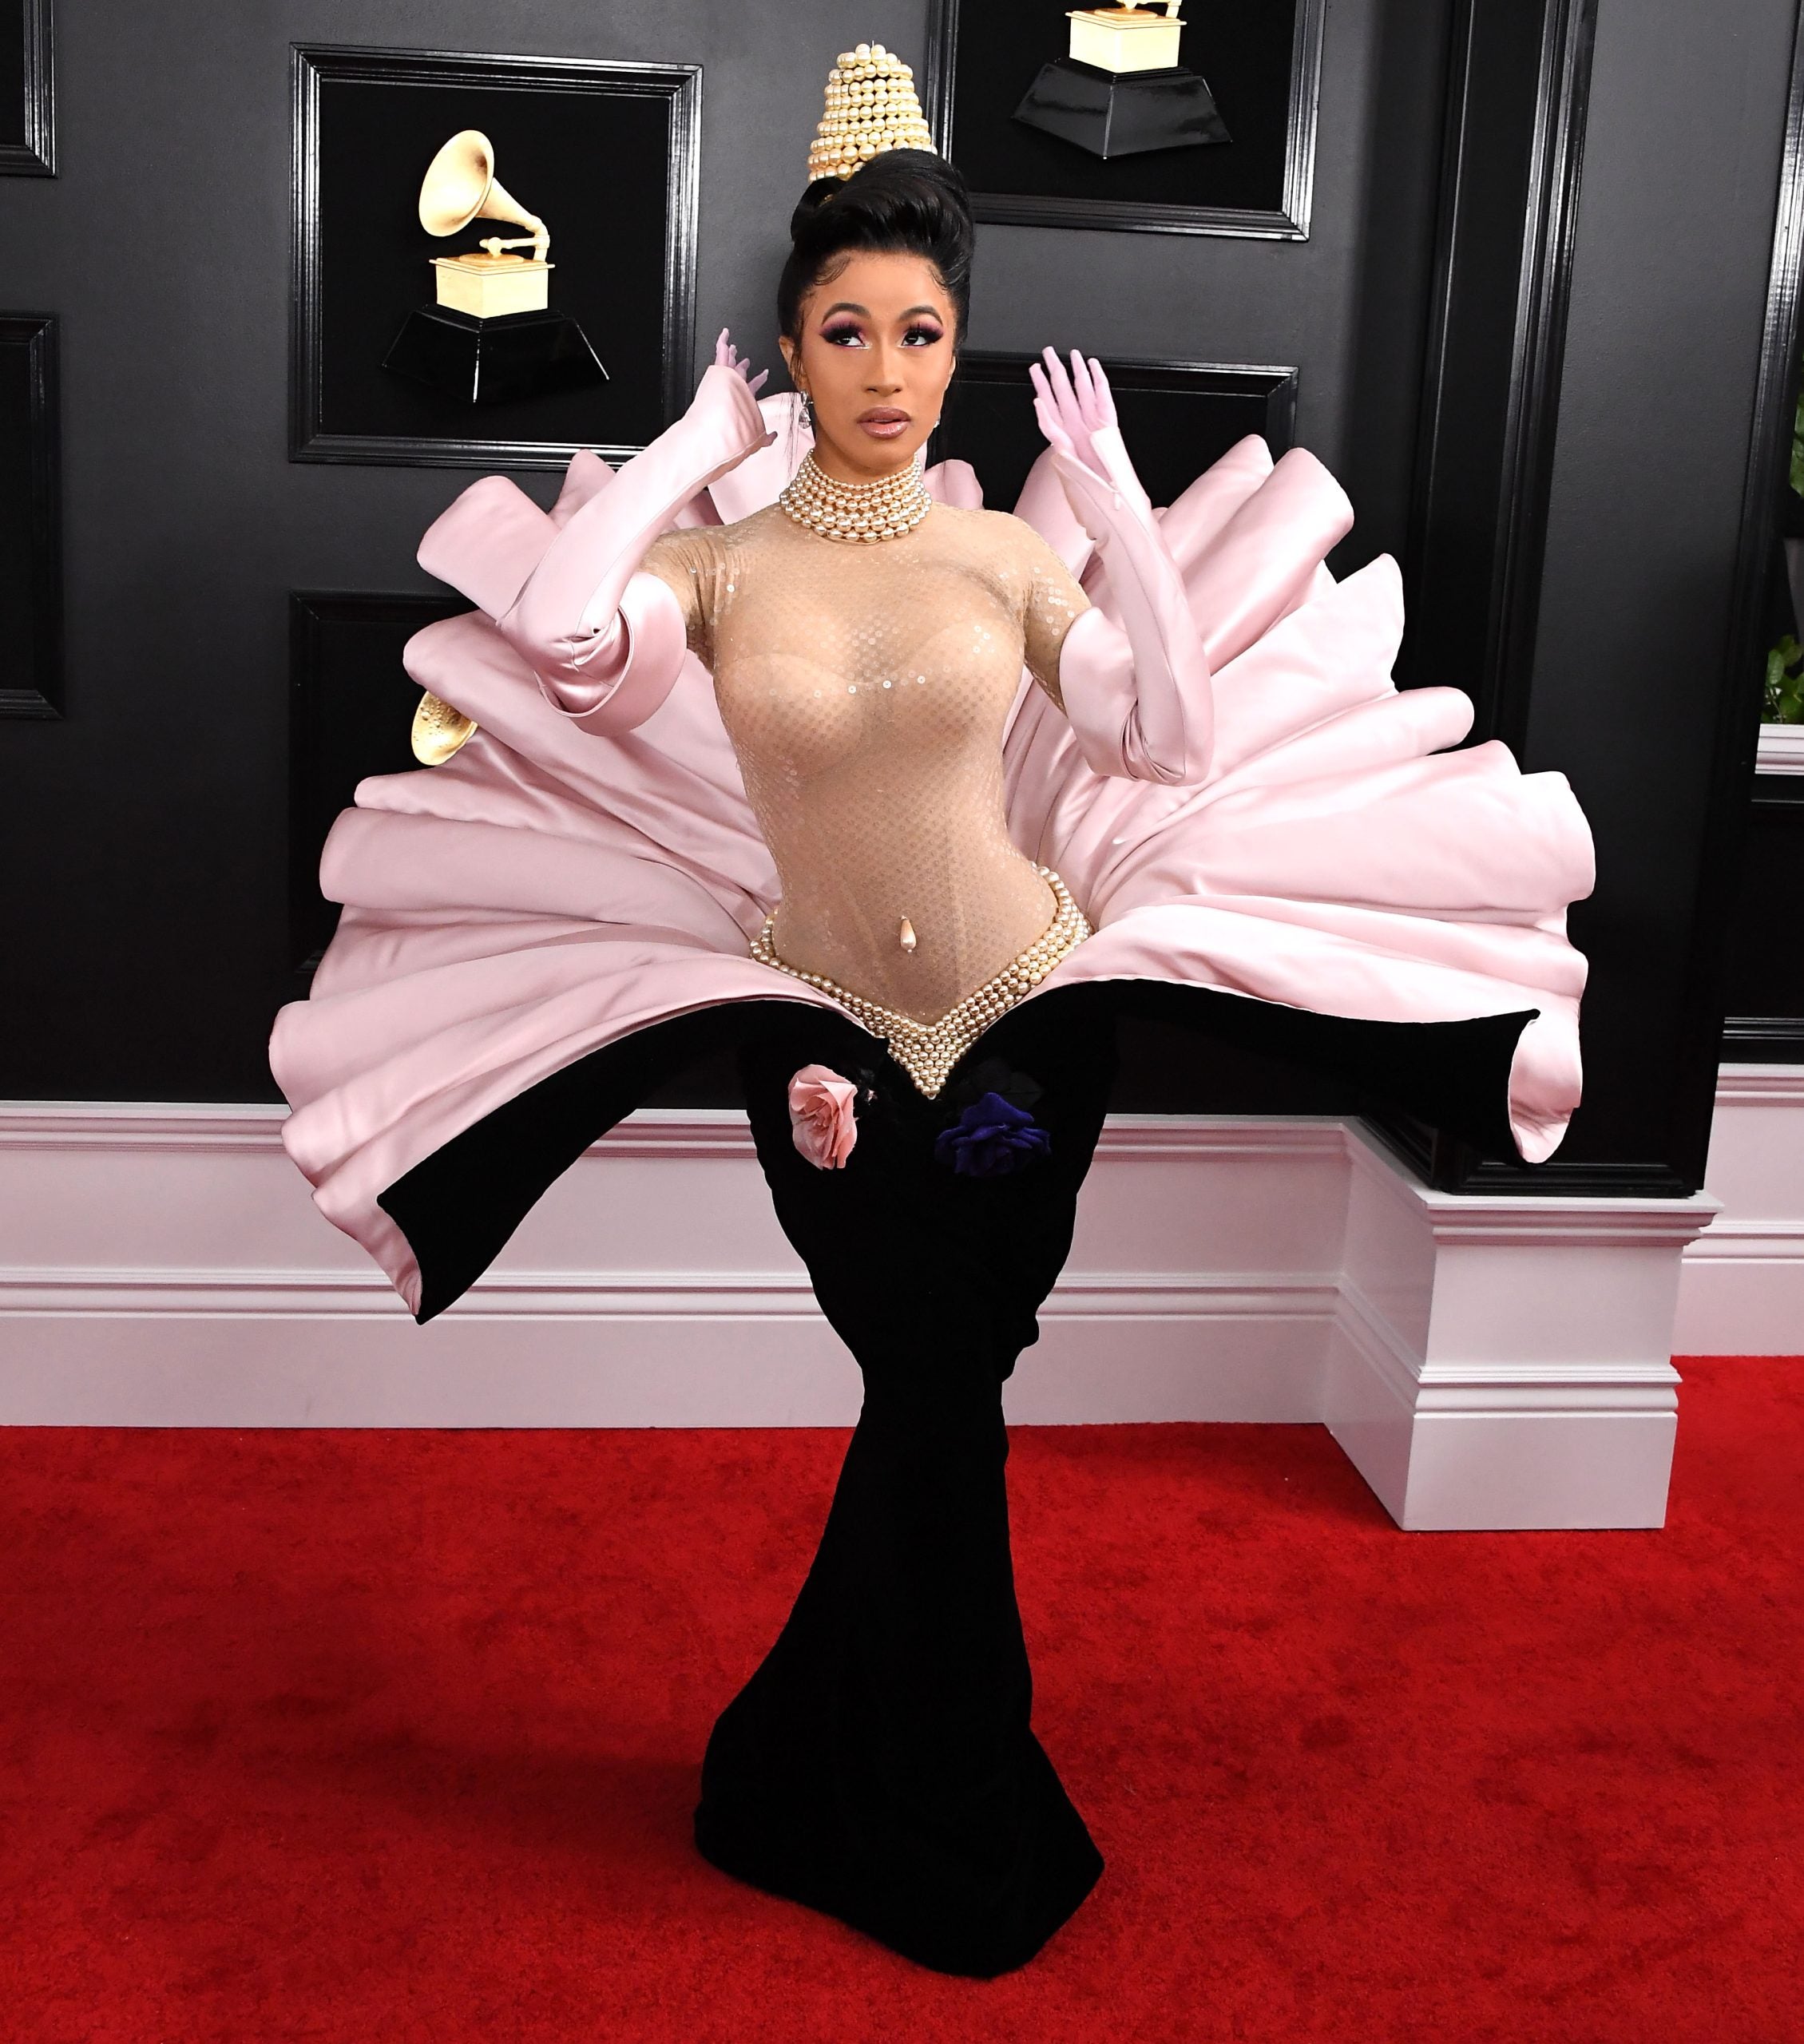 Cardi B May Be The Most Stylish Libra – Here Are Her Most Iconic Looks To Prove It